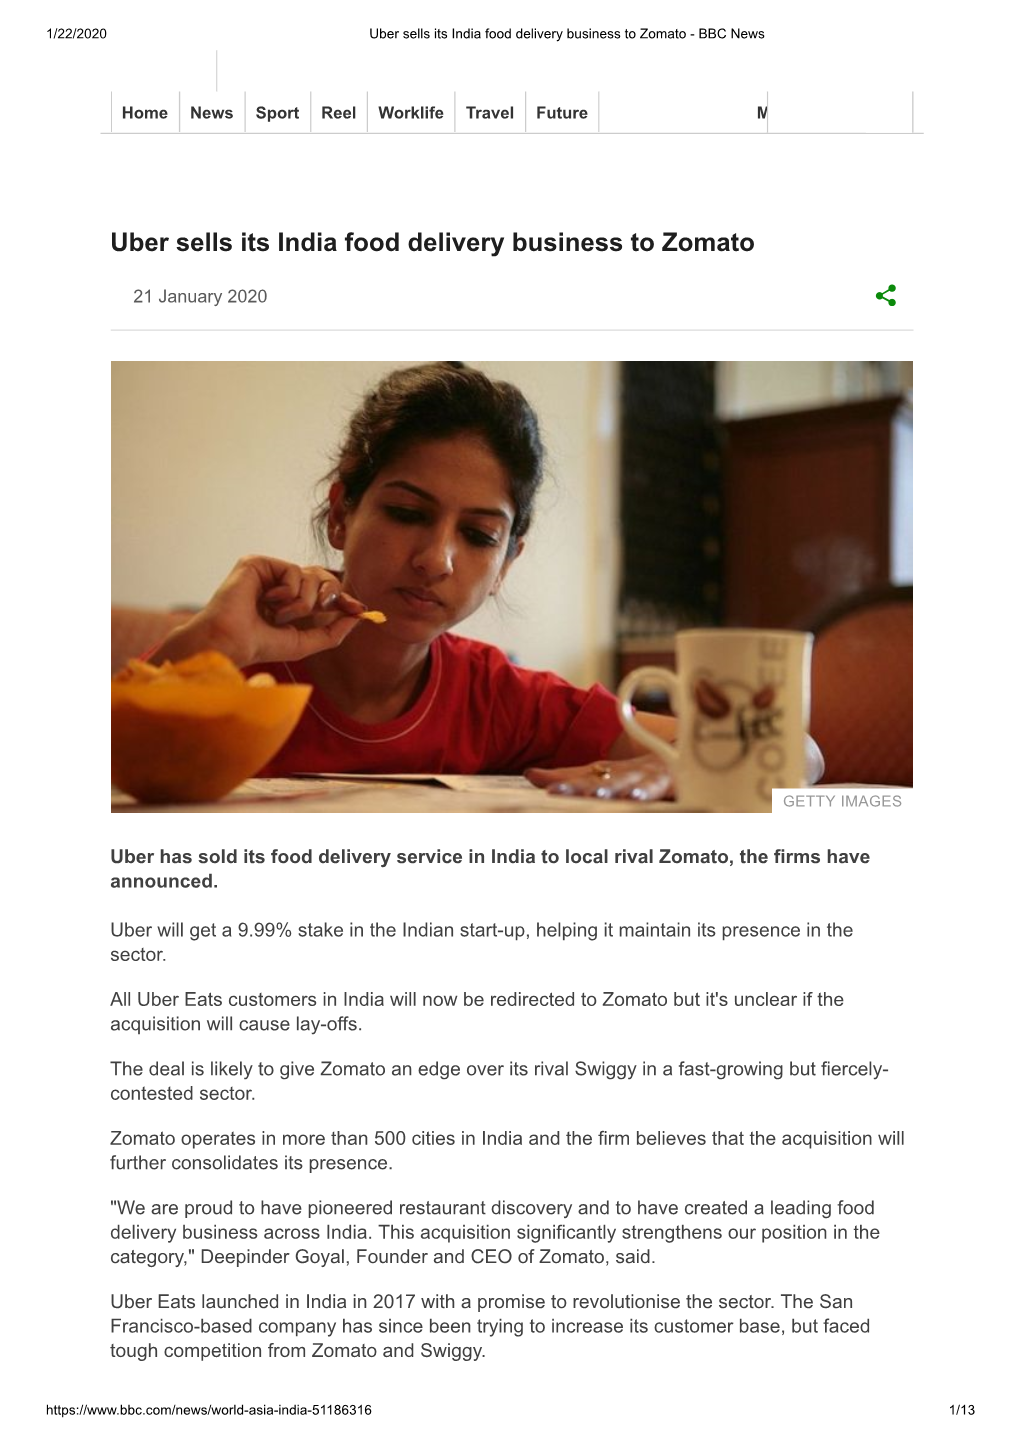 Uber Sells Its India Food Delivery Business to Zomato - BBC News